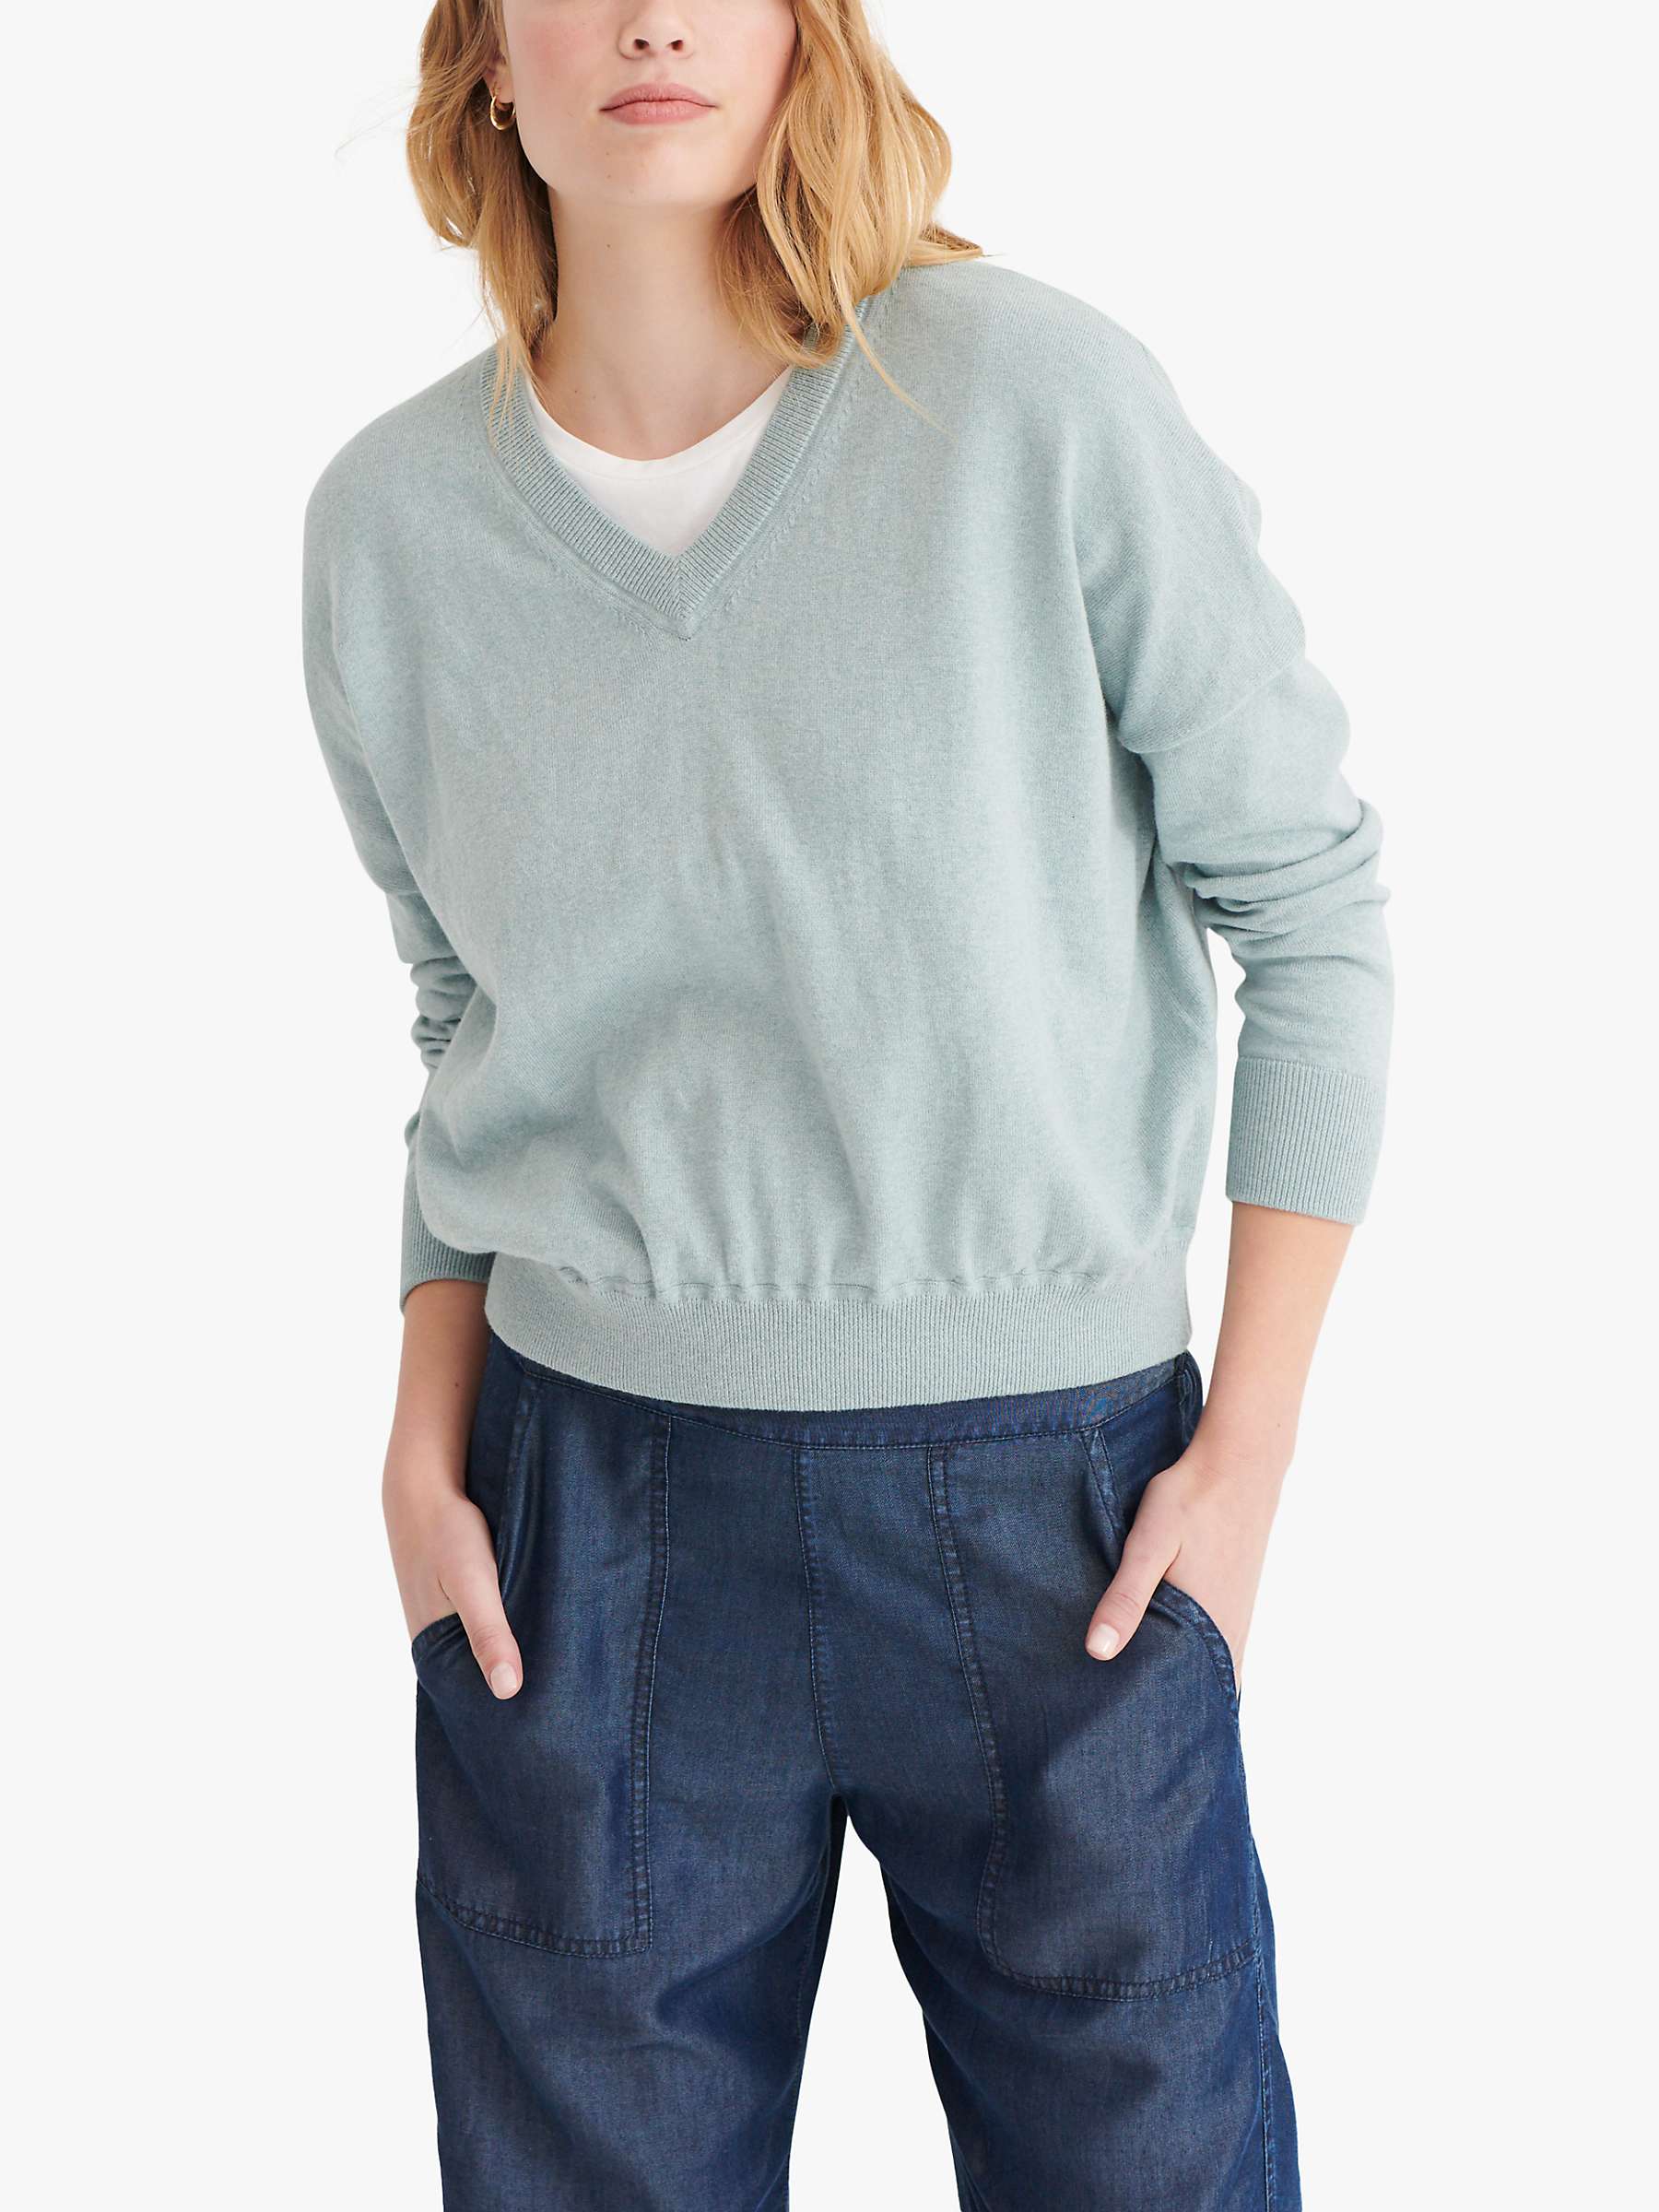 Buy NRBY Maddy Cotton Cashmere V-Neck Knit Sweater Online at johnlewis.com